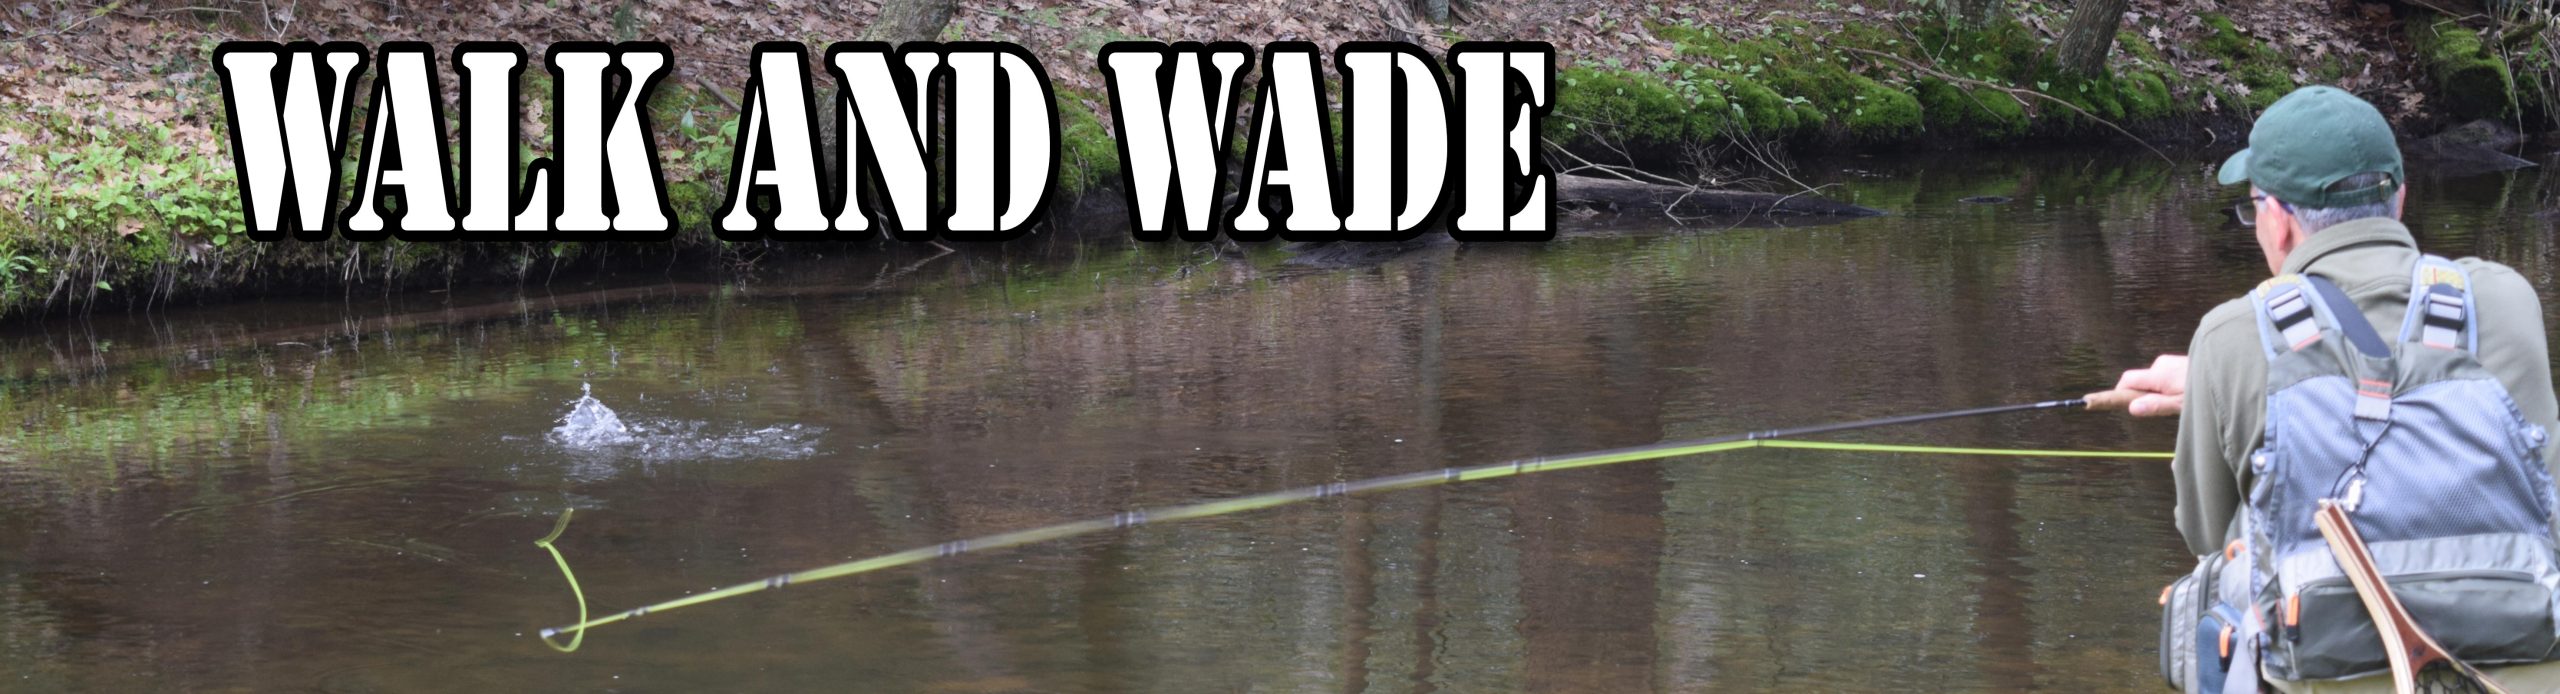 Walk and Wade Fly Fishing Day Trips on Penns, Spring, Pine, Kettle, Little Juniata, Lehigh, Tulpehocken, Manatawny, Pohopoco and Lackawanna River just to name a few of the stream we guide on in PA.